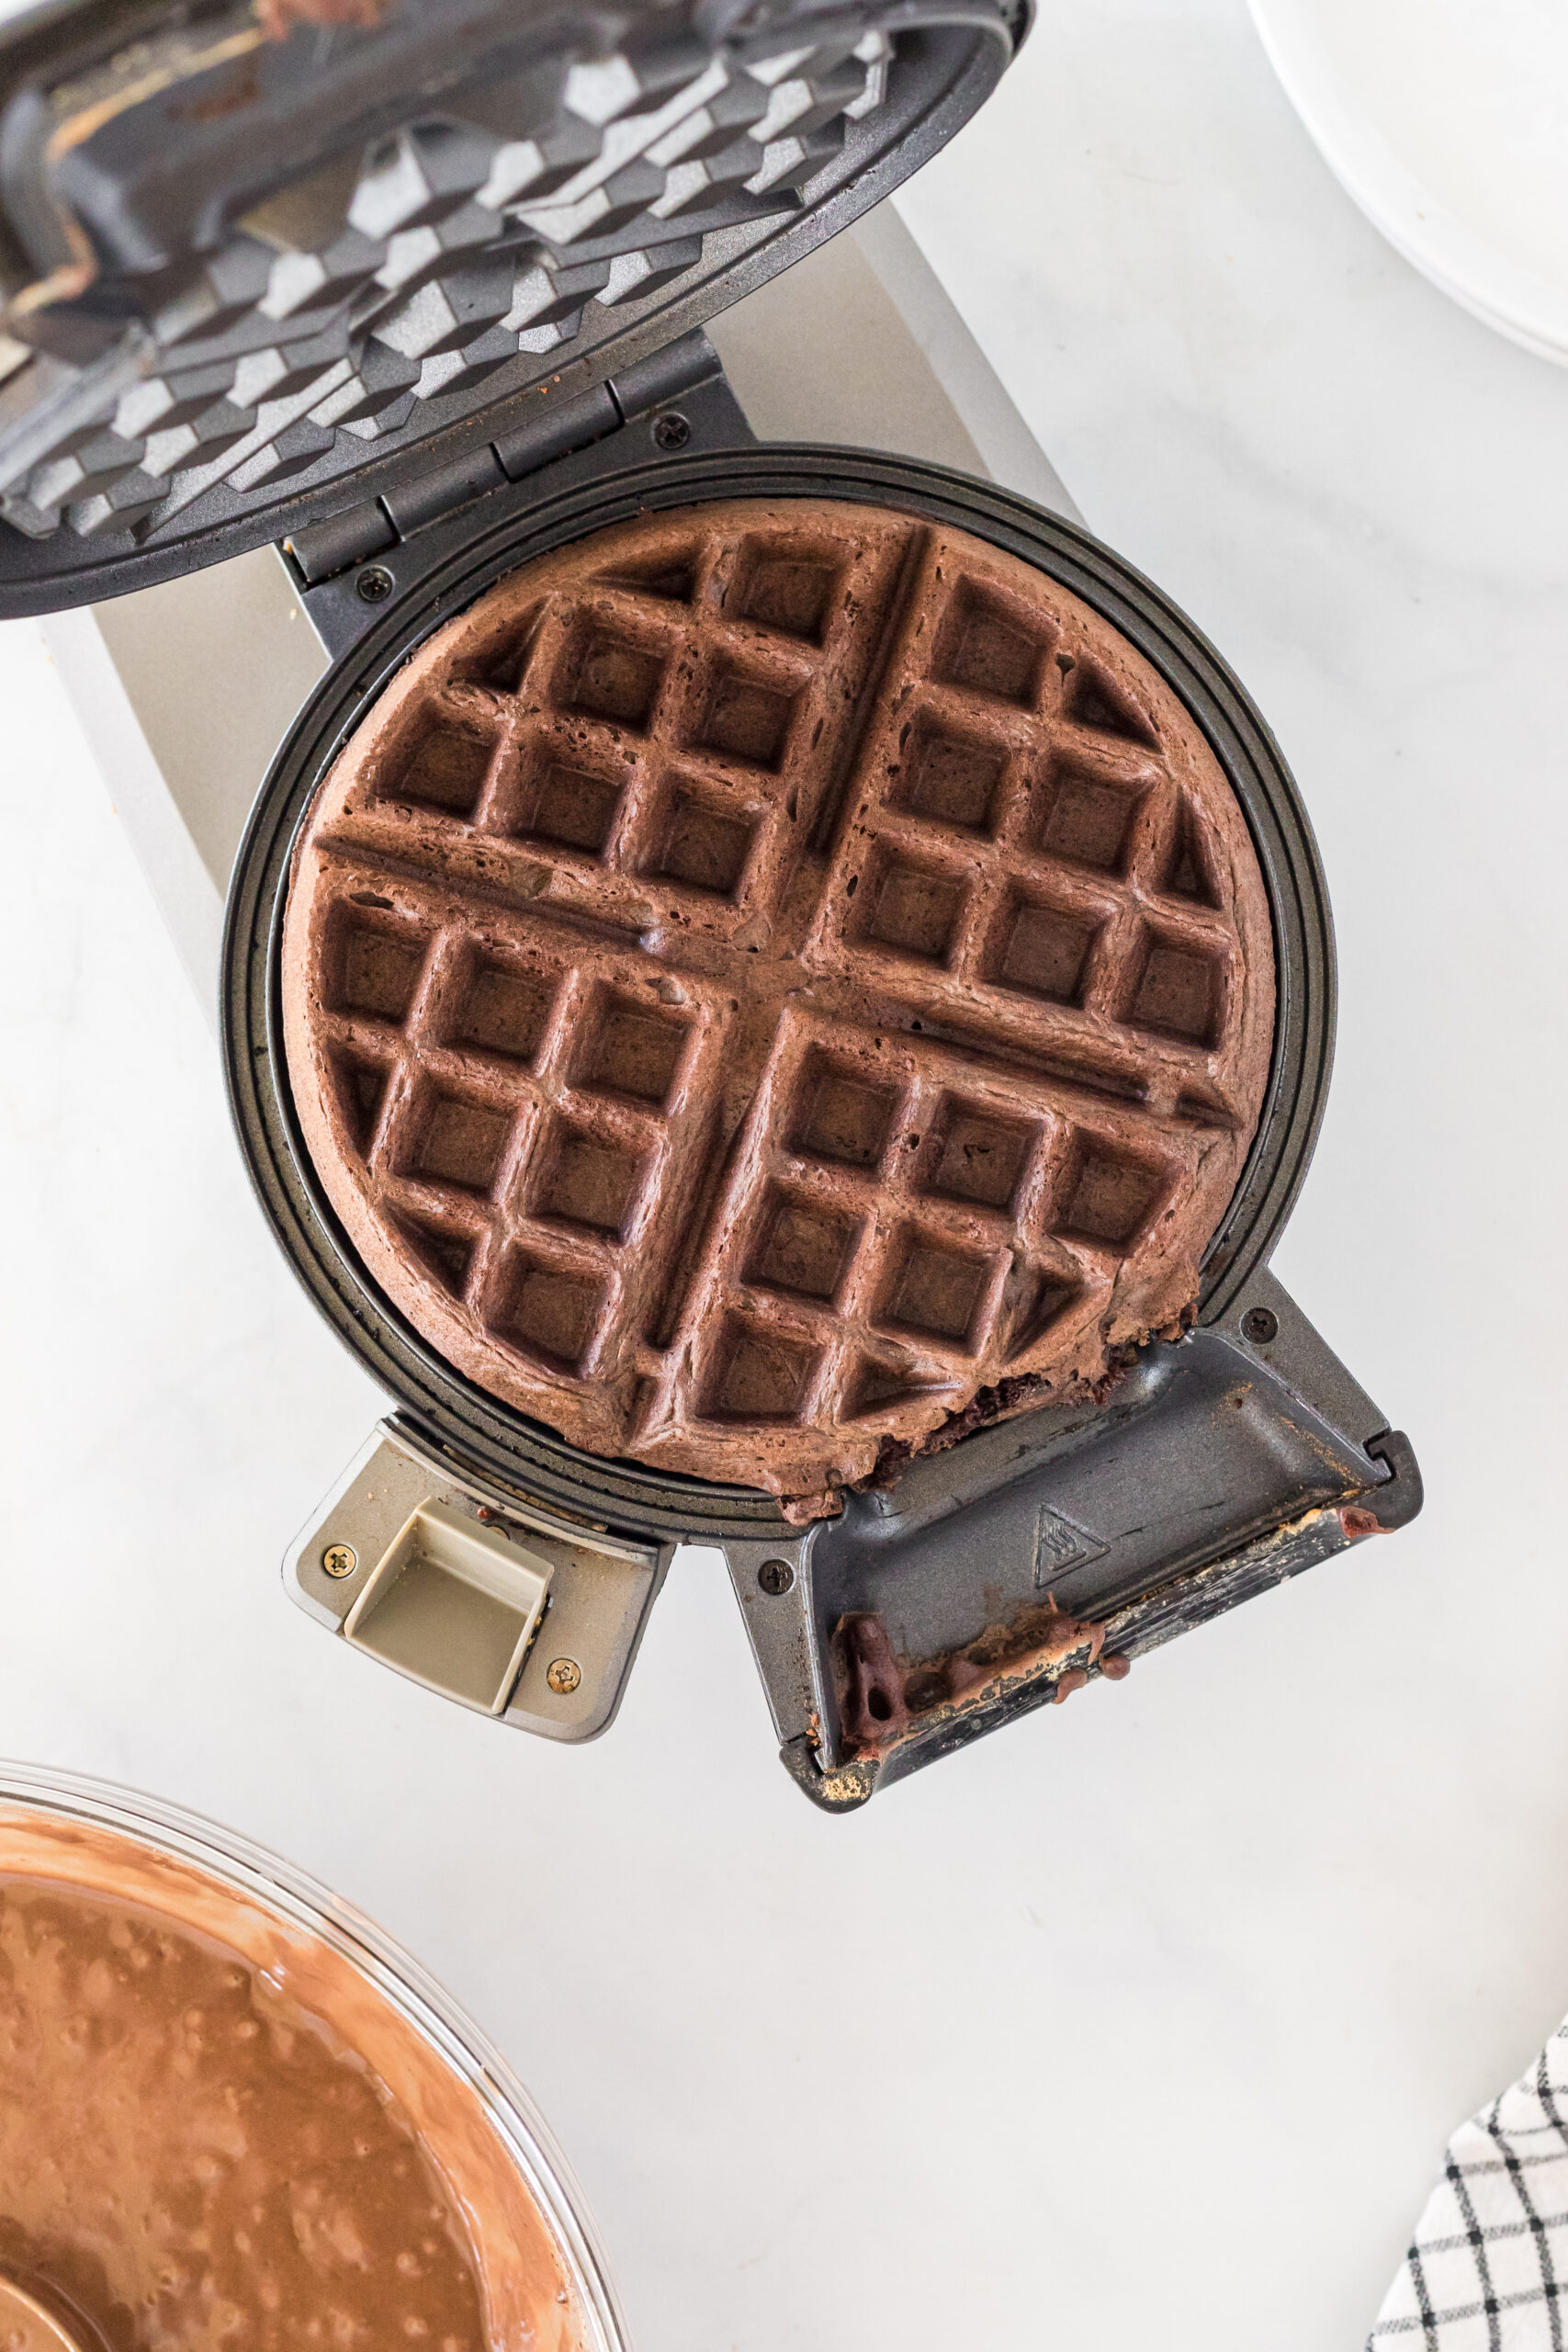 Cooked waffle in a waffle iron